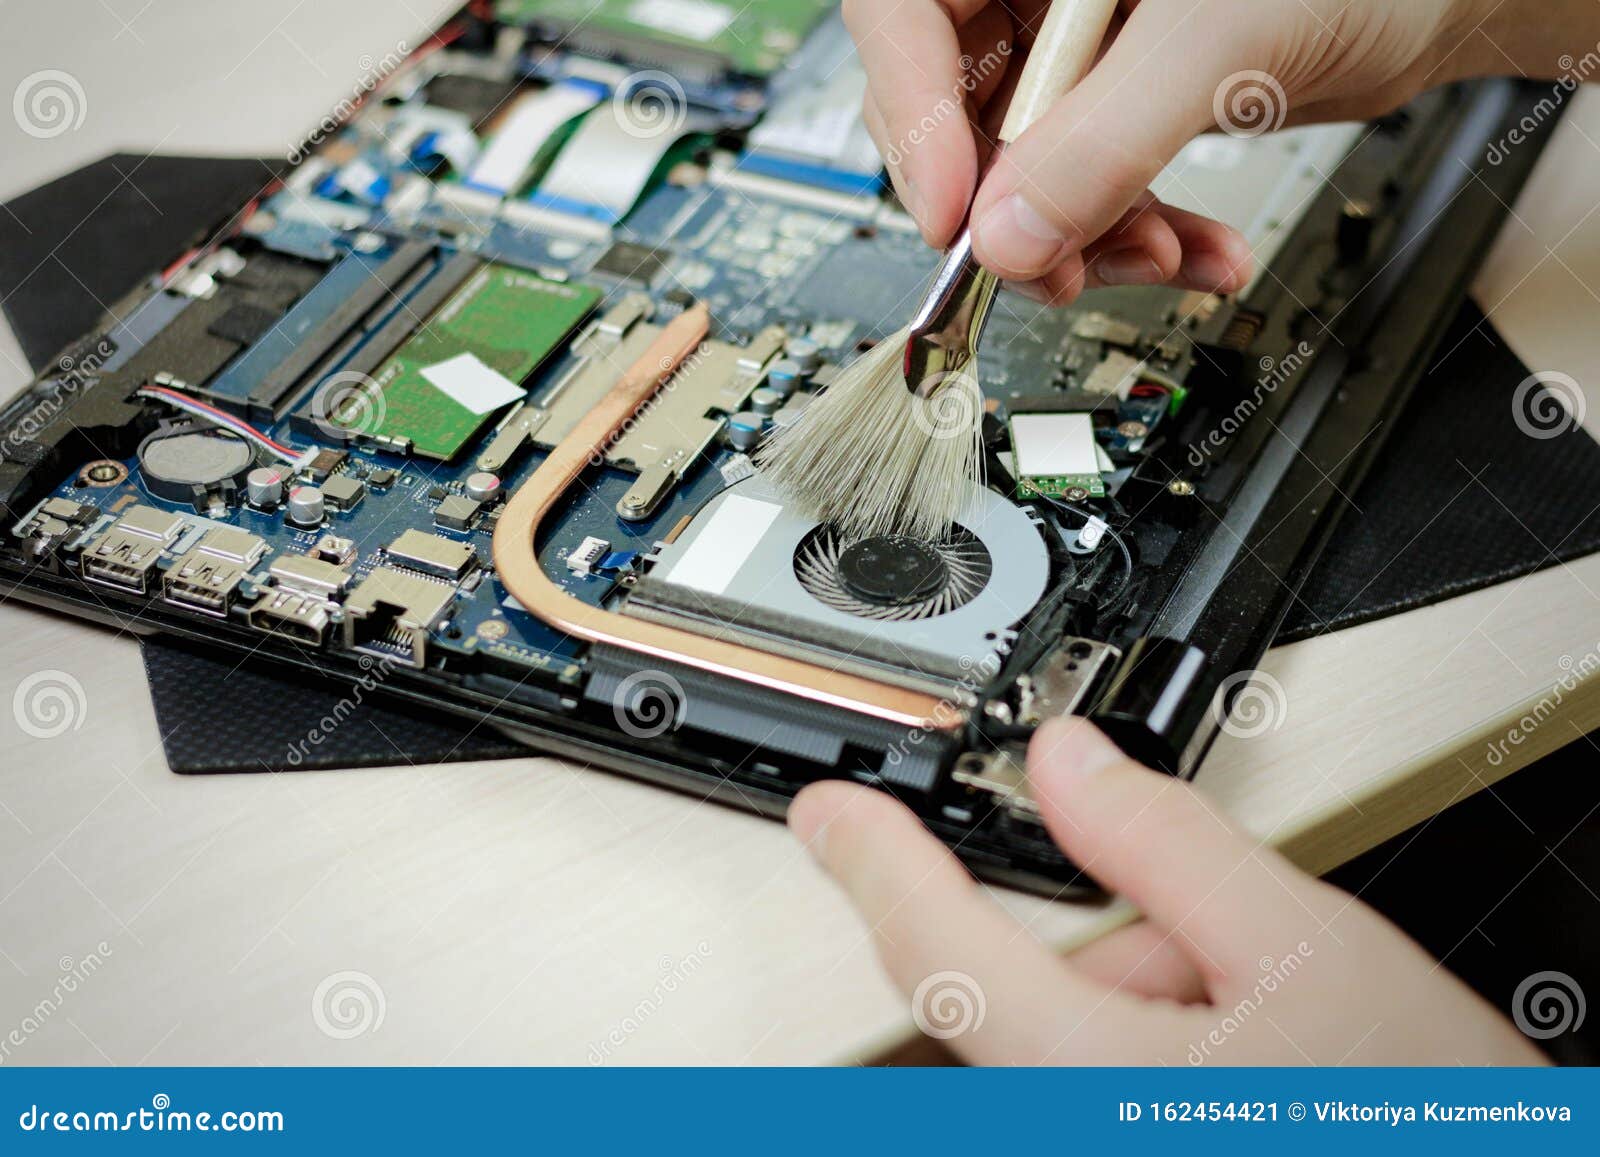 Cleaning the Laptop from Dust with a Brush. Close Up Stock Image